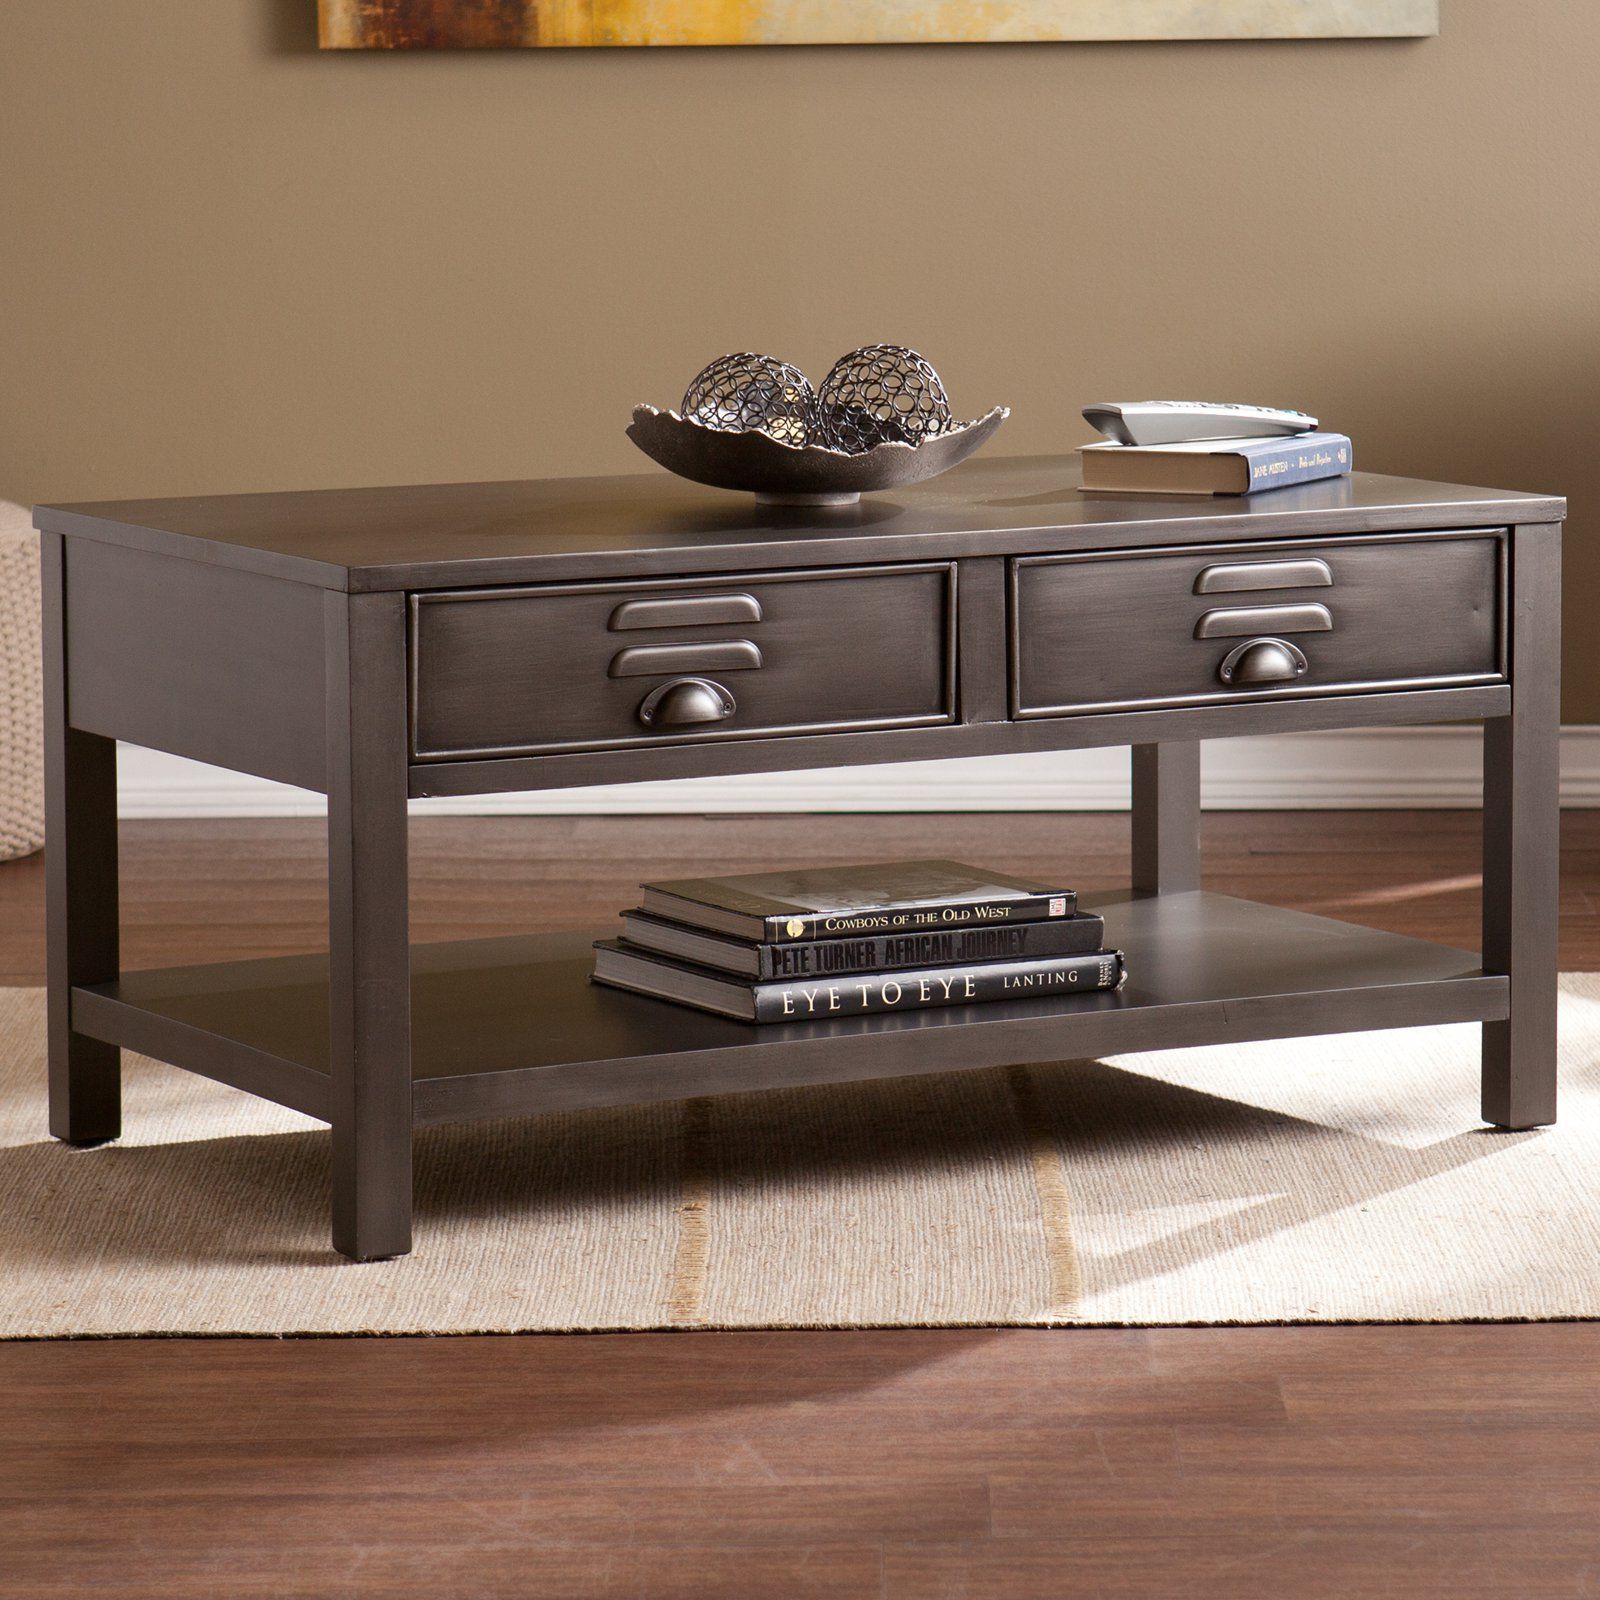 Southern Enterprises Radcliff Cocktail Table | Www.hayneedle For Southern Enterprises Larksmill Coffee Tables (Gallery 7 of 20)